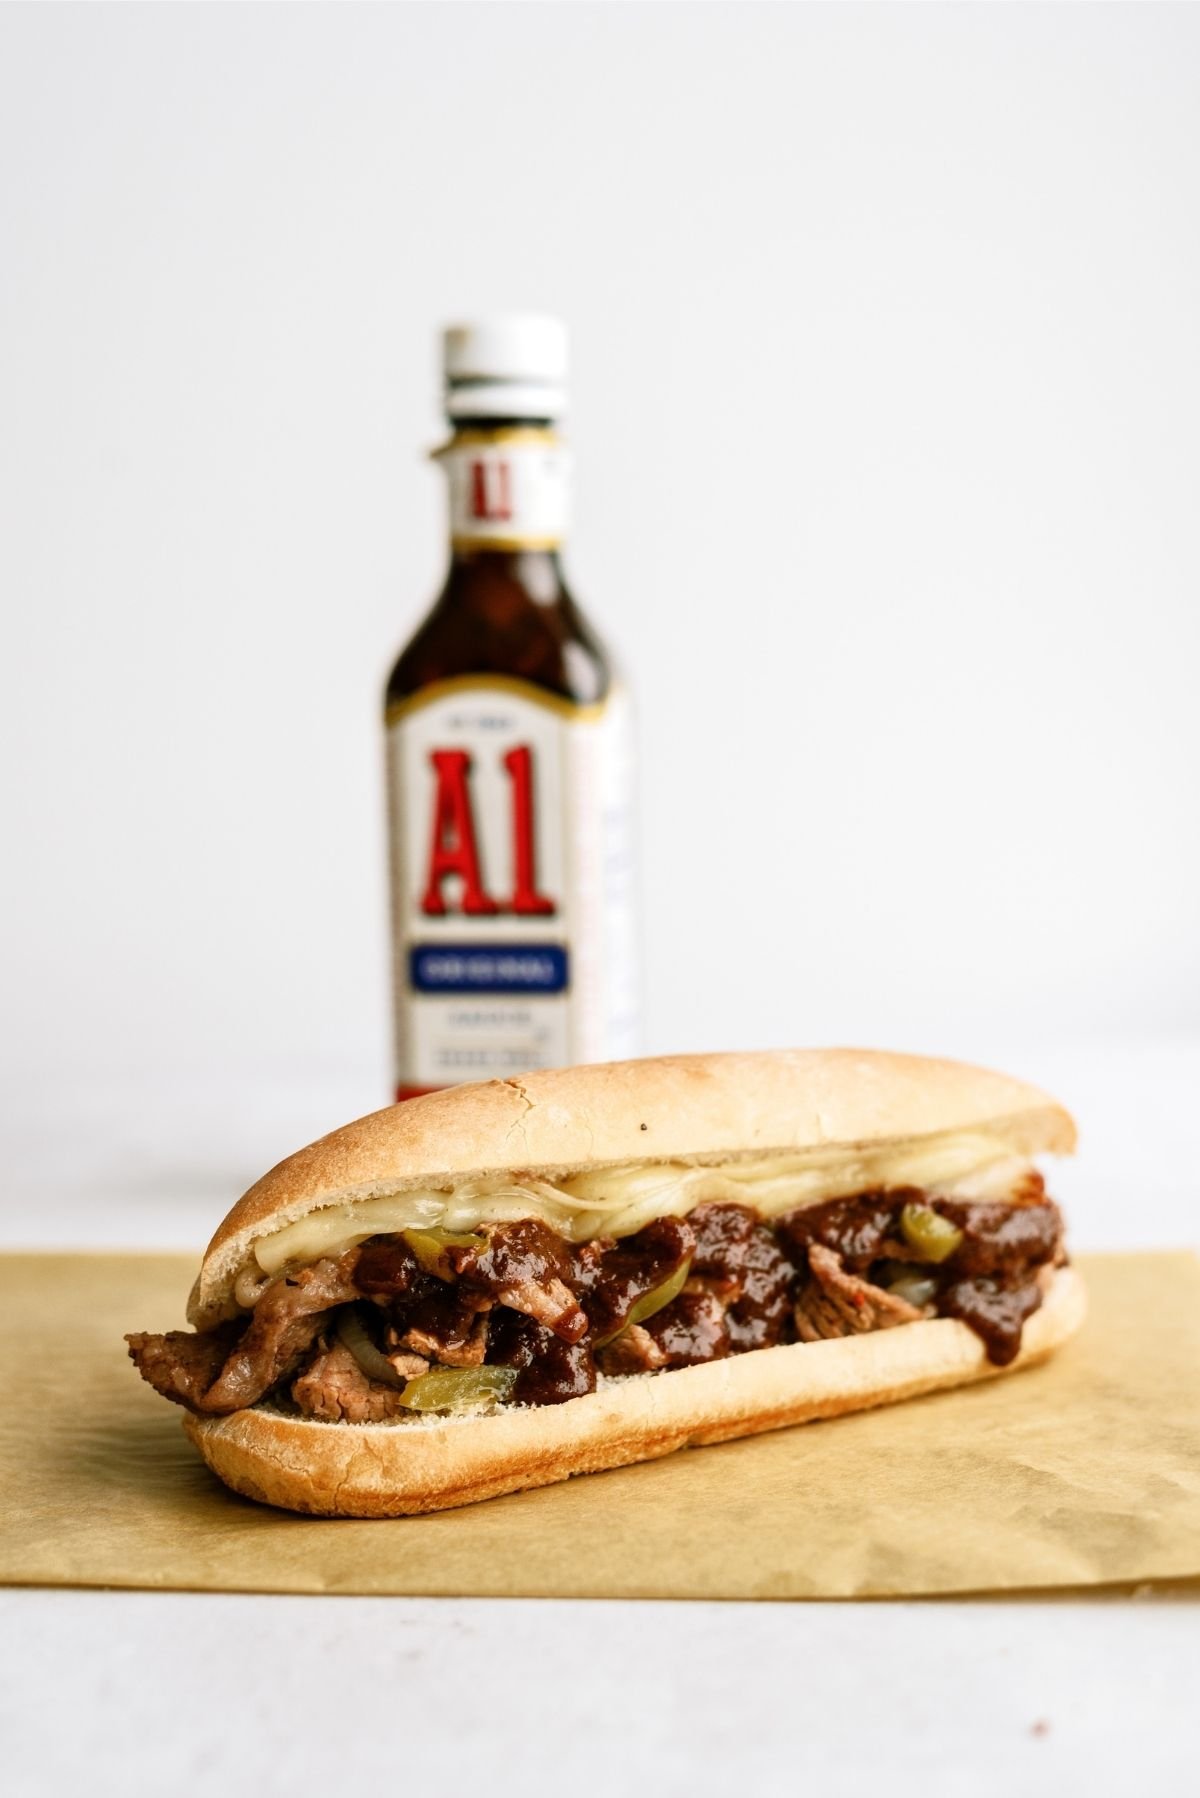 Slow Cooker Philly Cheese Steak Sandwich on a plate with a bottle of A1 in the background